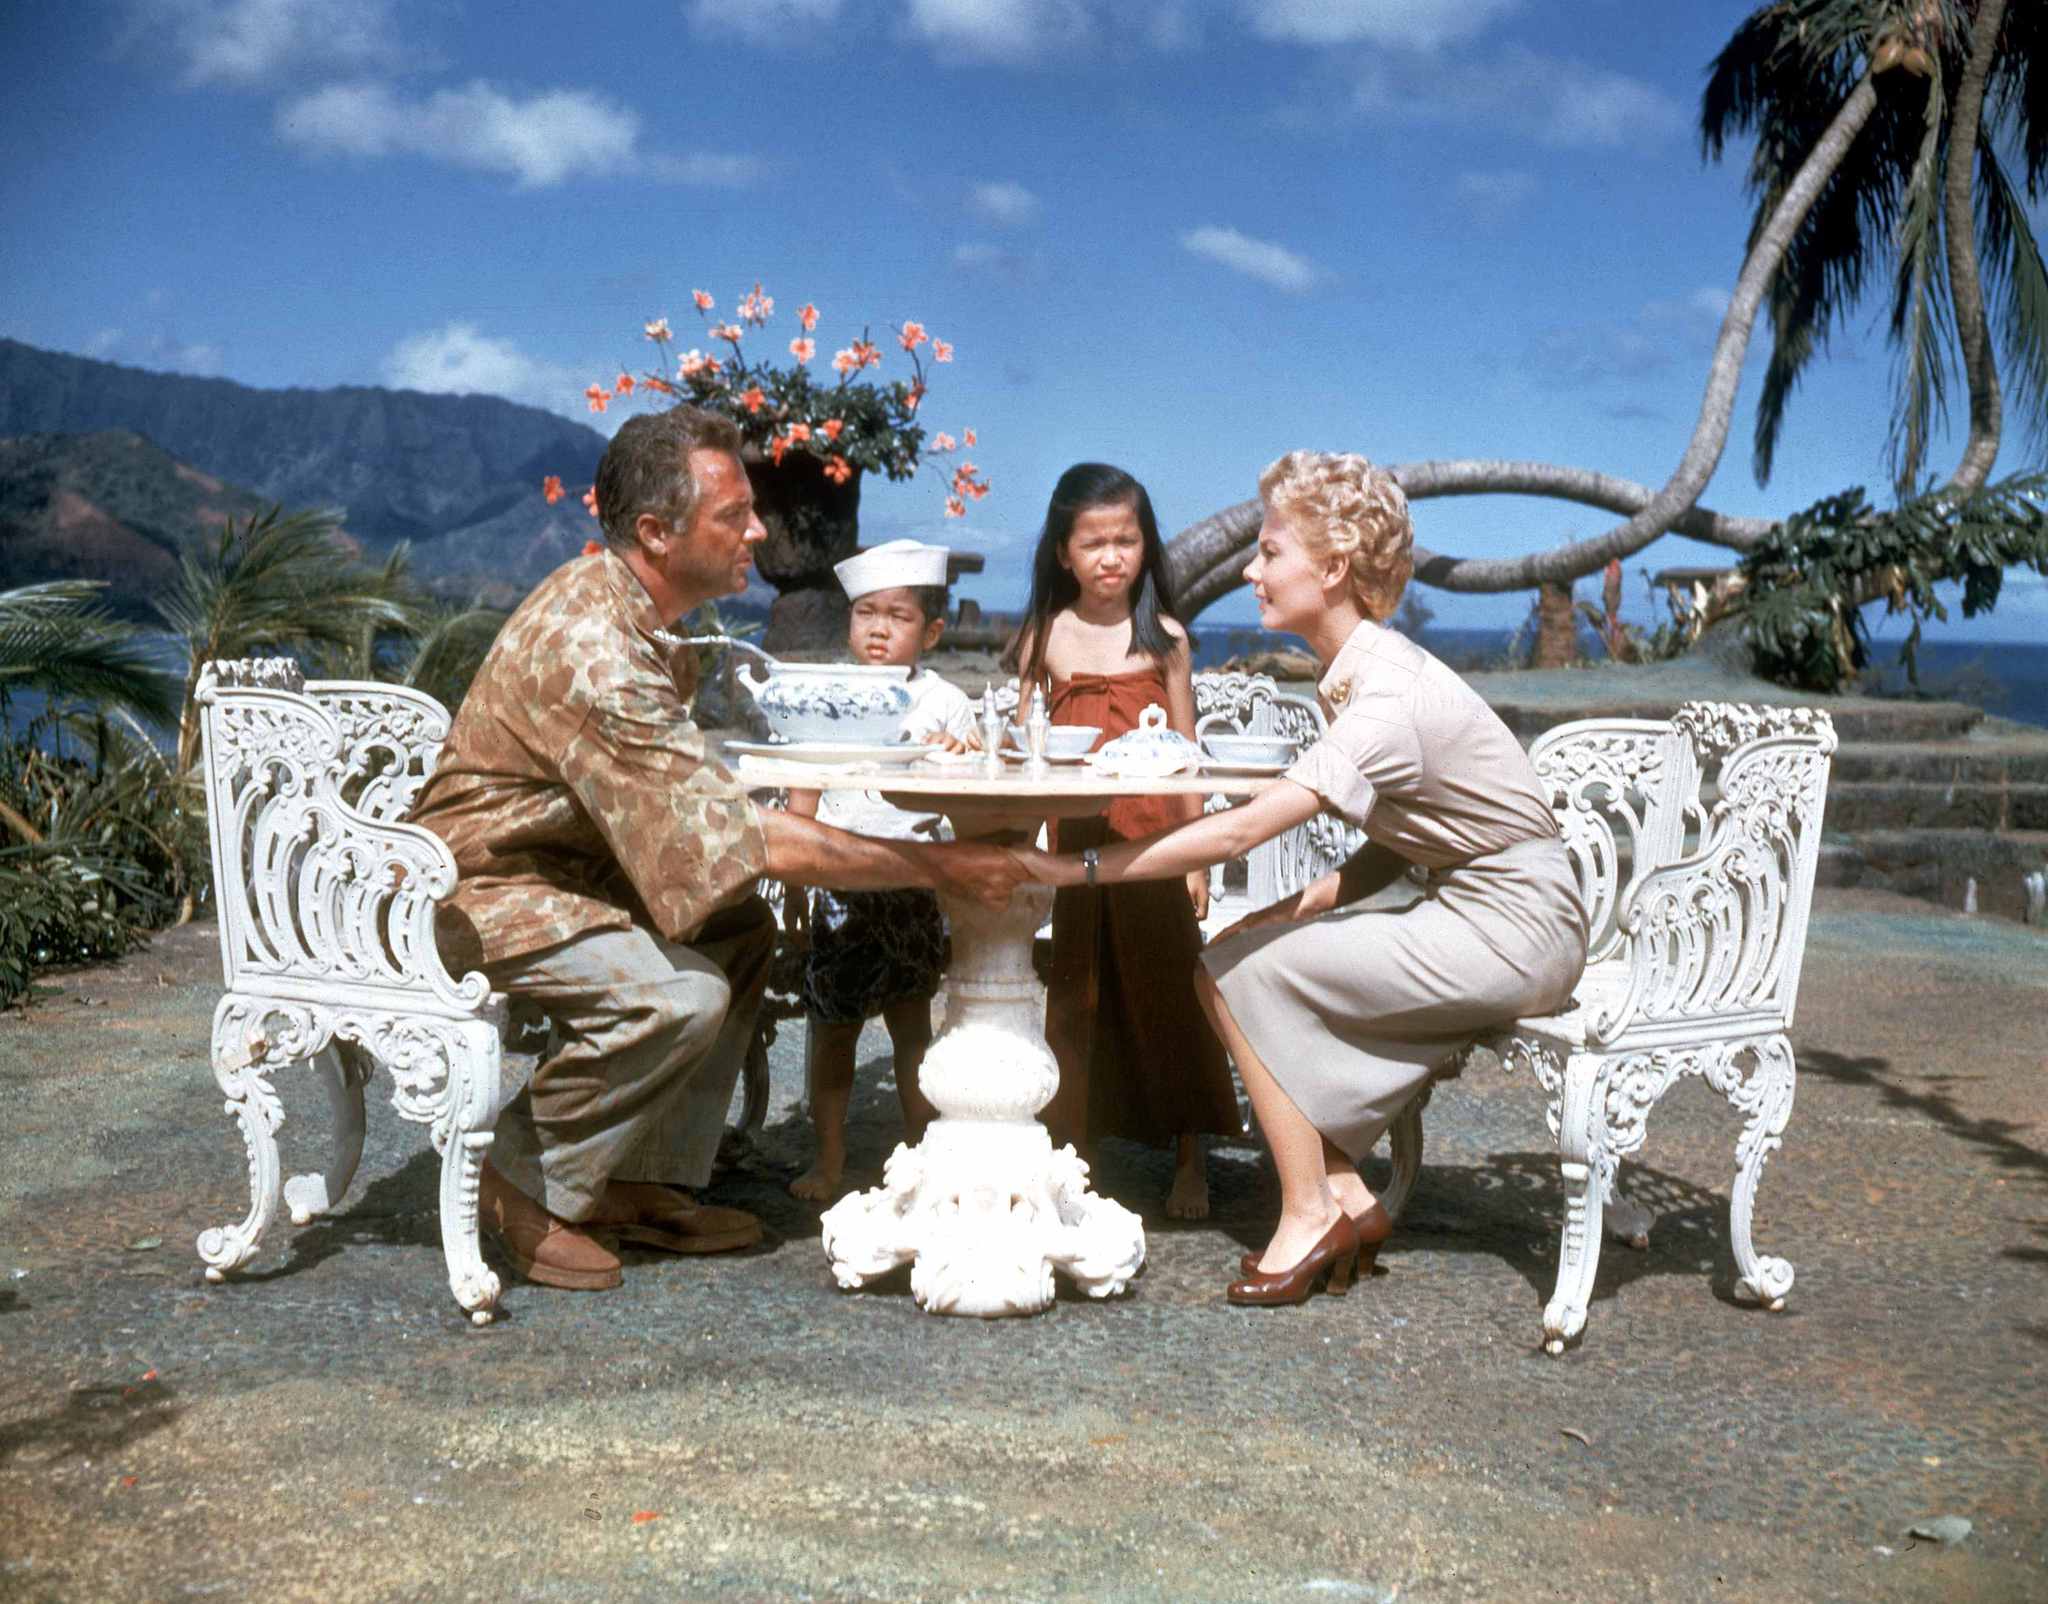 Still of Rossano Brazzi and Mitzi Gaynor in South Pacific (1958)